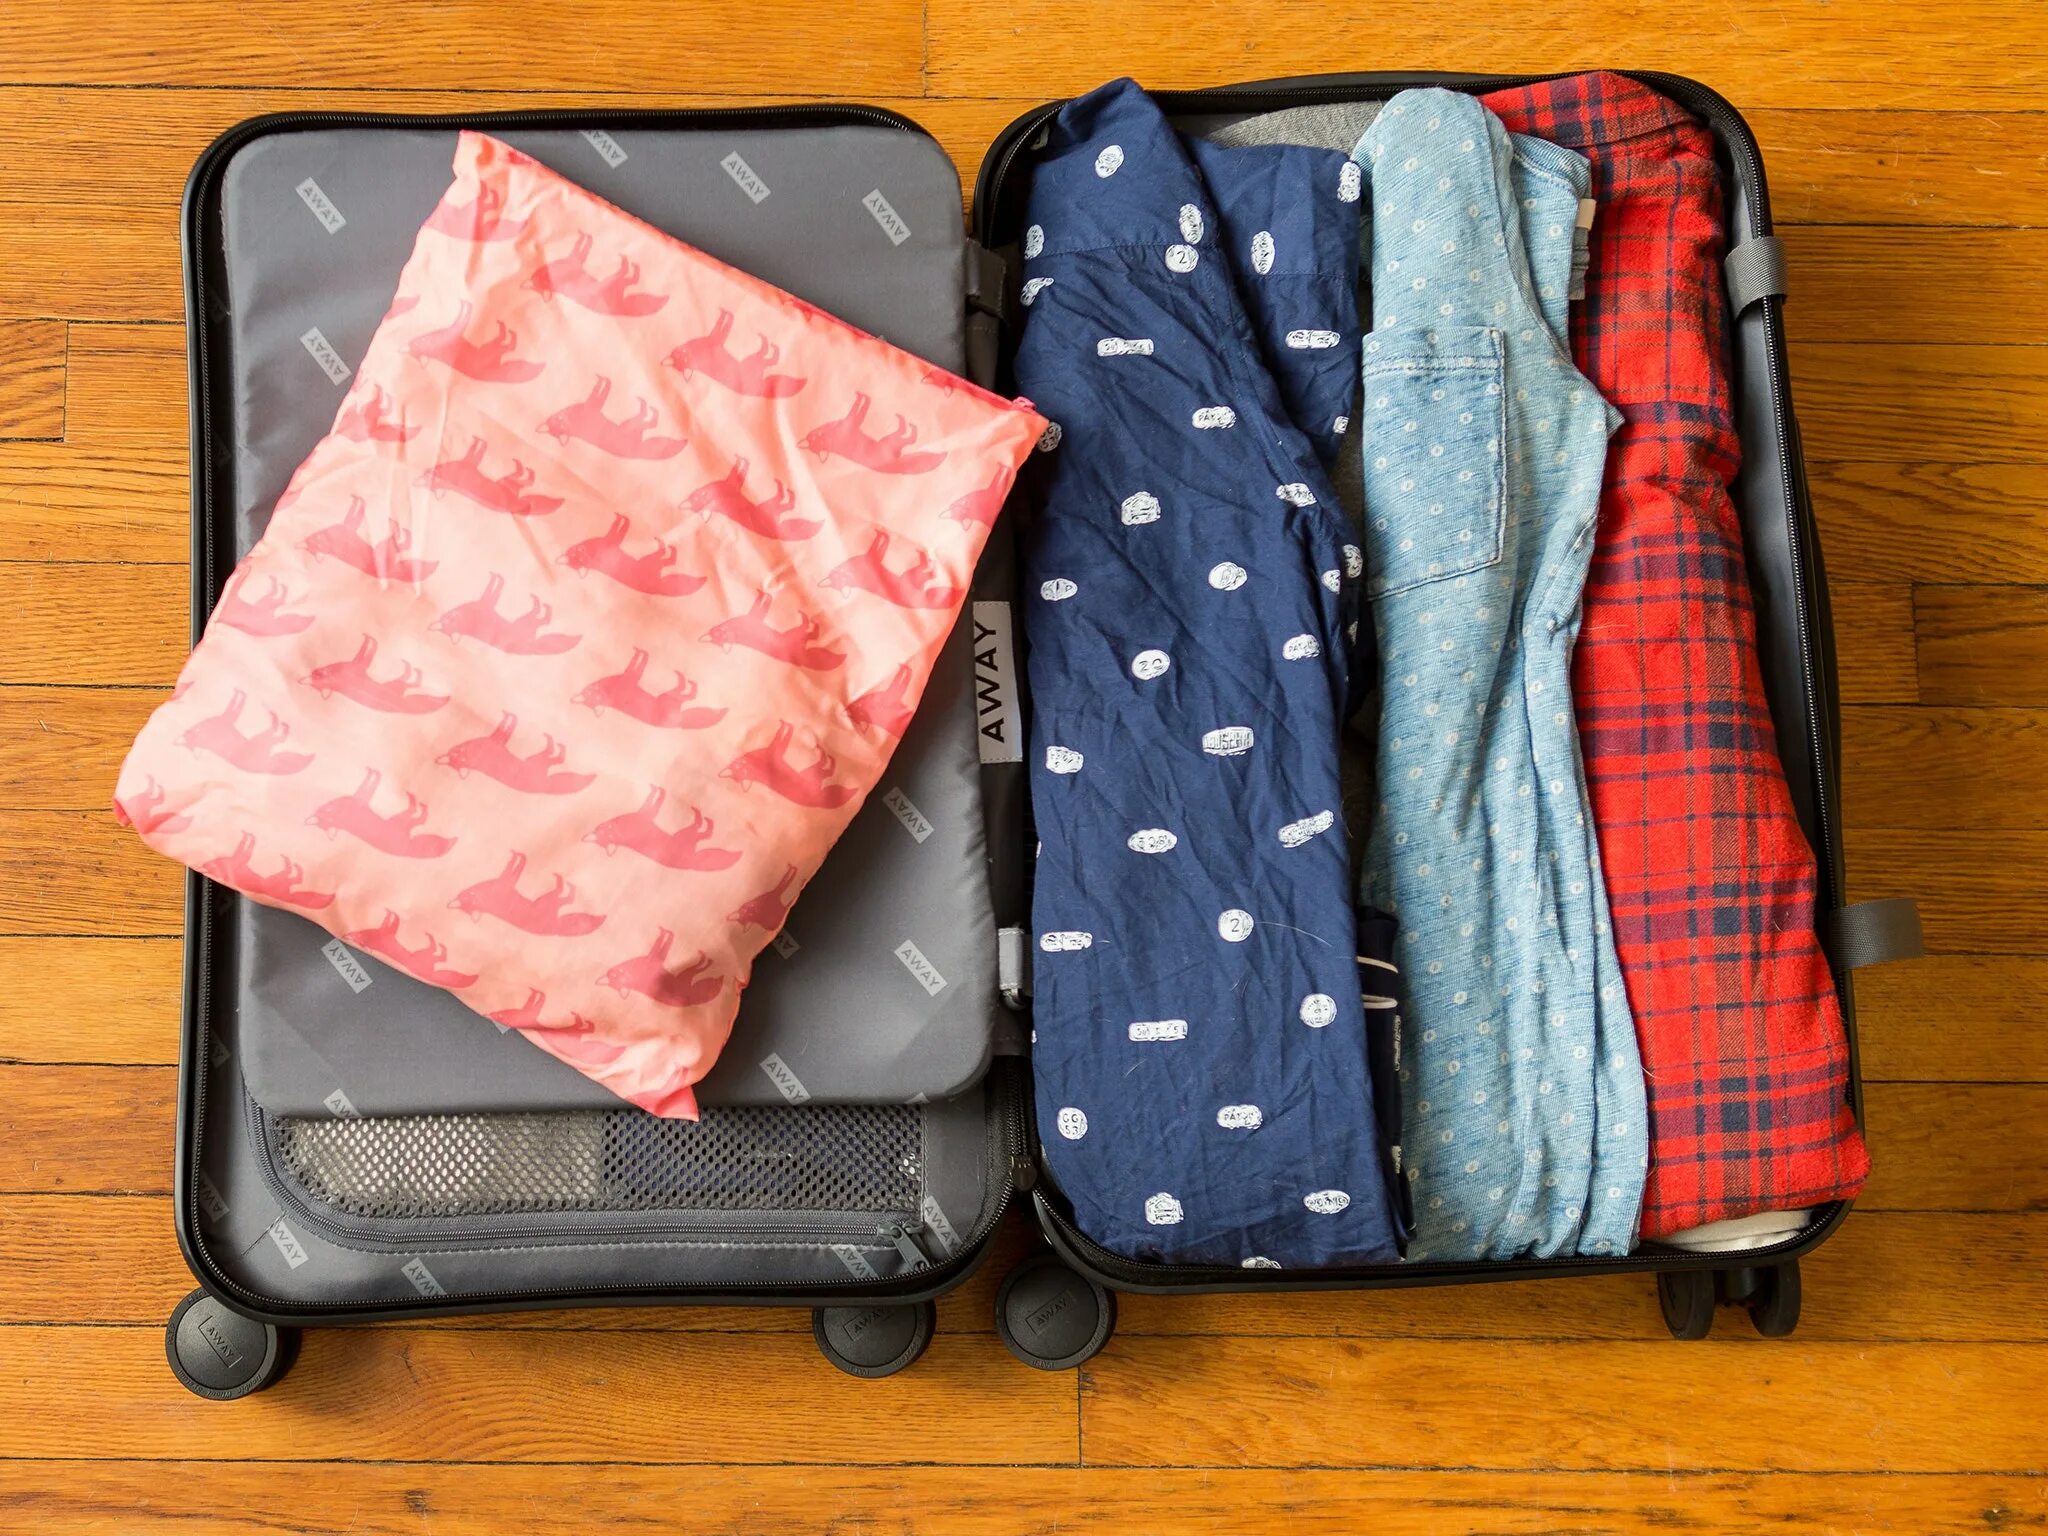 Packing space. Стиль для путешествий. Clothes in Suitcase. Clothes Pack. Suitcase Full of Dress.